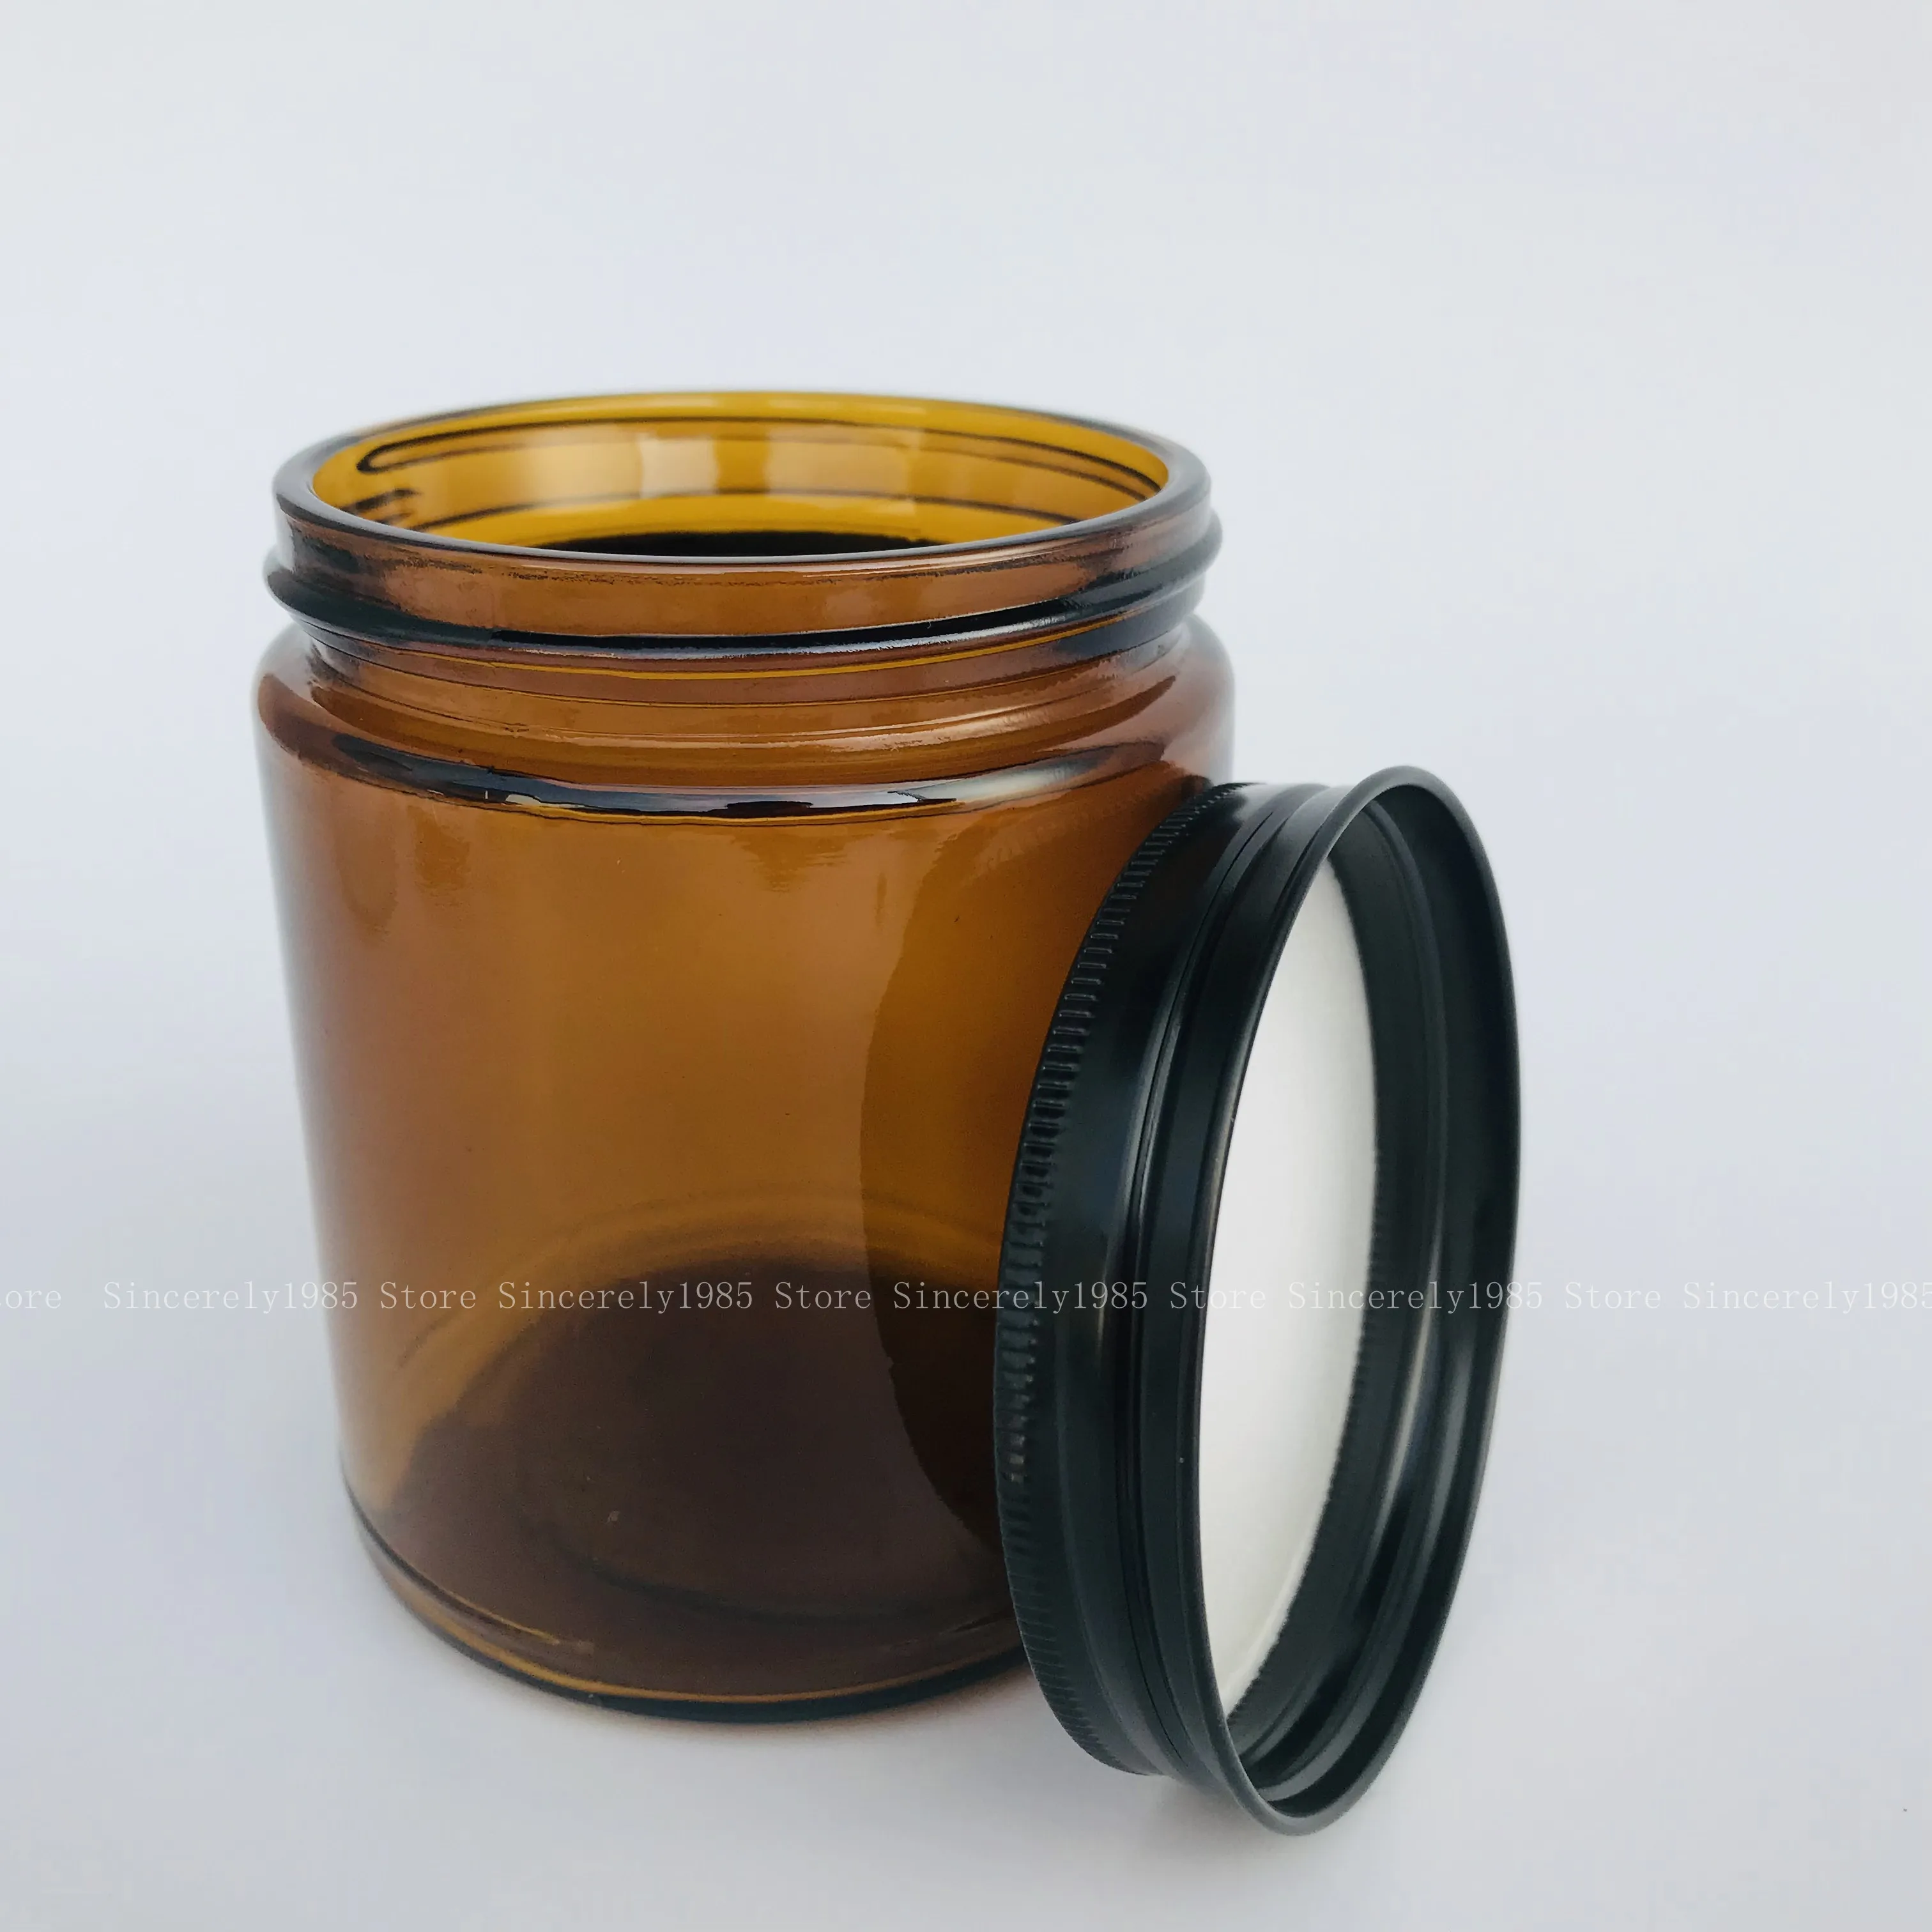 2pcs 250ml Amber Glass Candle Jars Empty Round Cosmetic Jar for DIY Aromatherapy Wax Melts Candles Salve Lotion Cream Storage herve gambs eau italienne fragranced candle